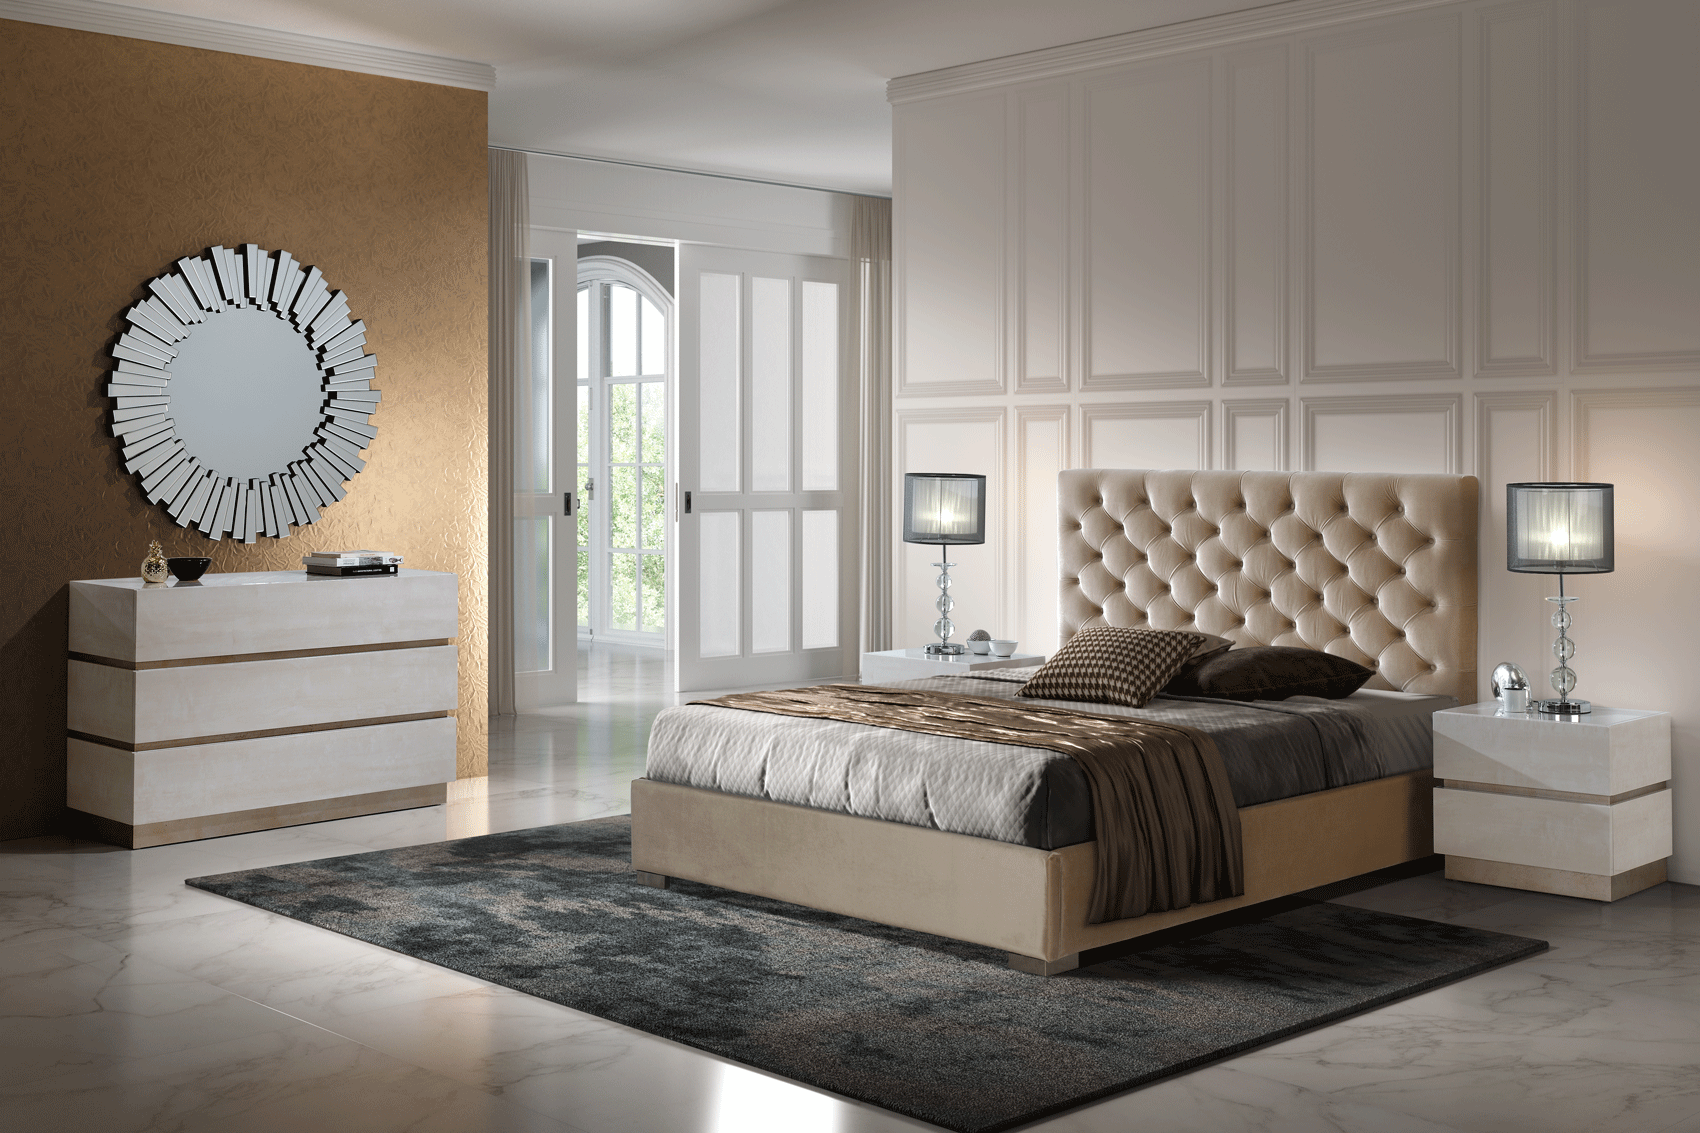 Bedroom Furniture Modern Bedrooms QS and KS 852 Gala Bed, M-151, C-151, E-100